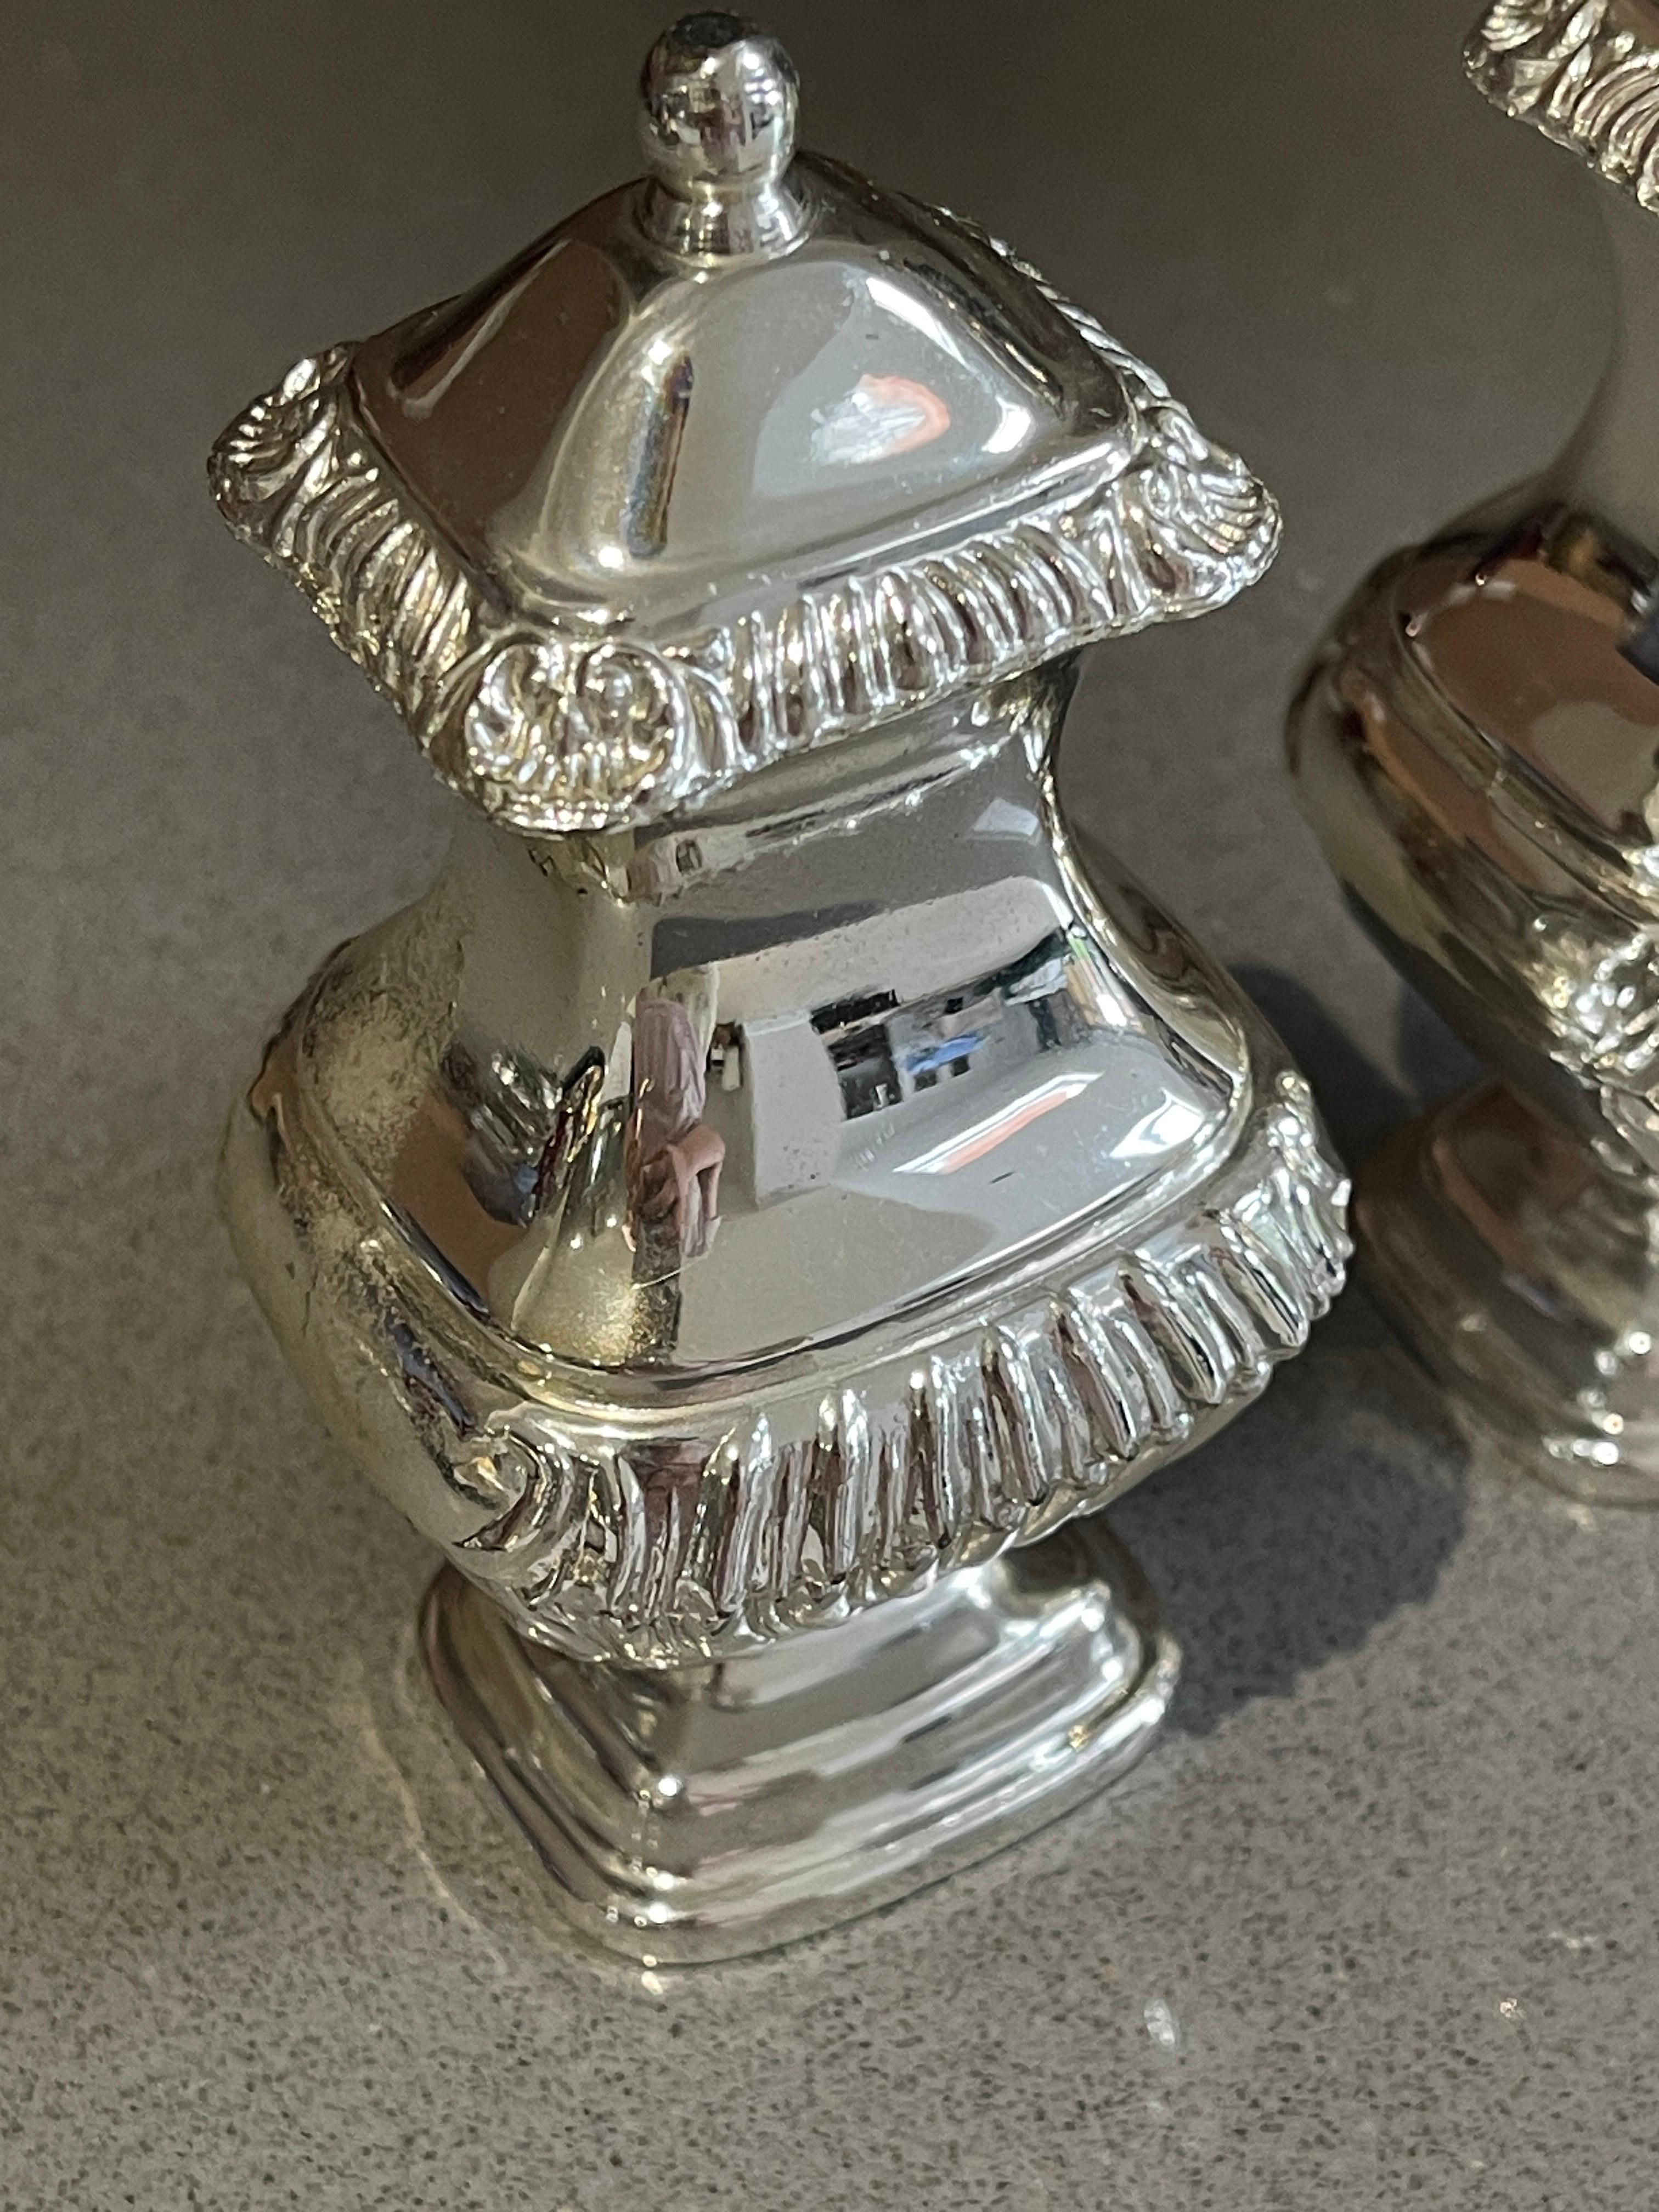 Antique Silver Salt Shaker Rococo Style, Pair of Decorative Pepper Shaker Sale  In Excellent Condition For Sale In Hampshire, GB